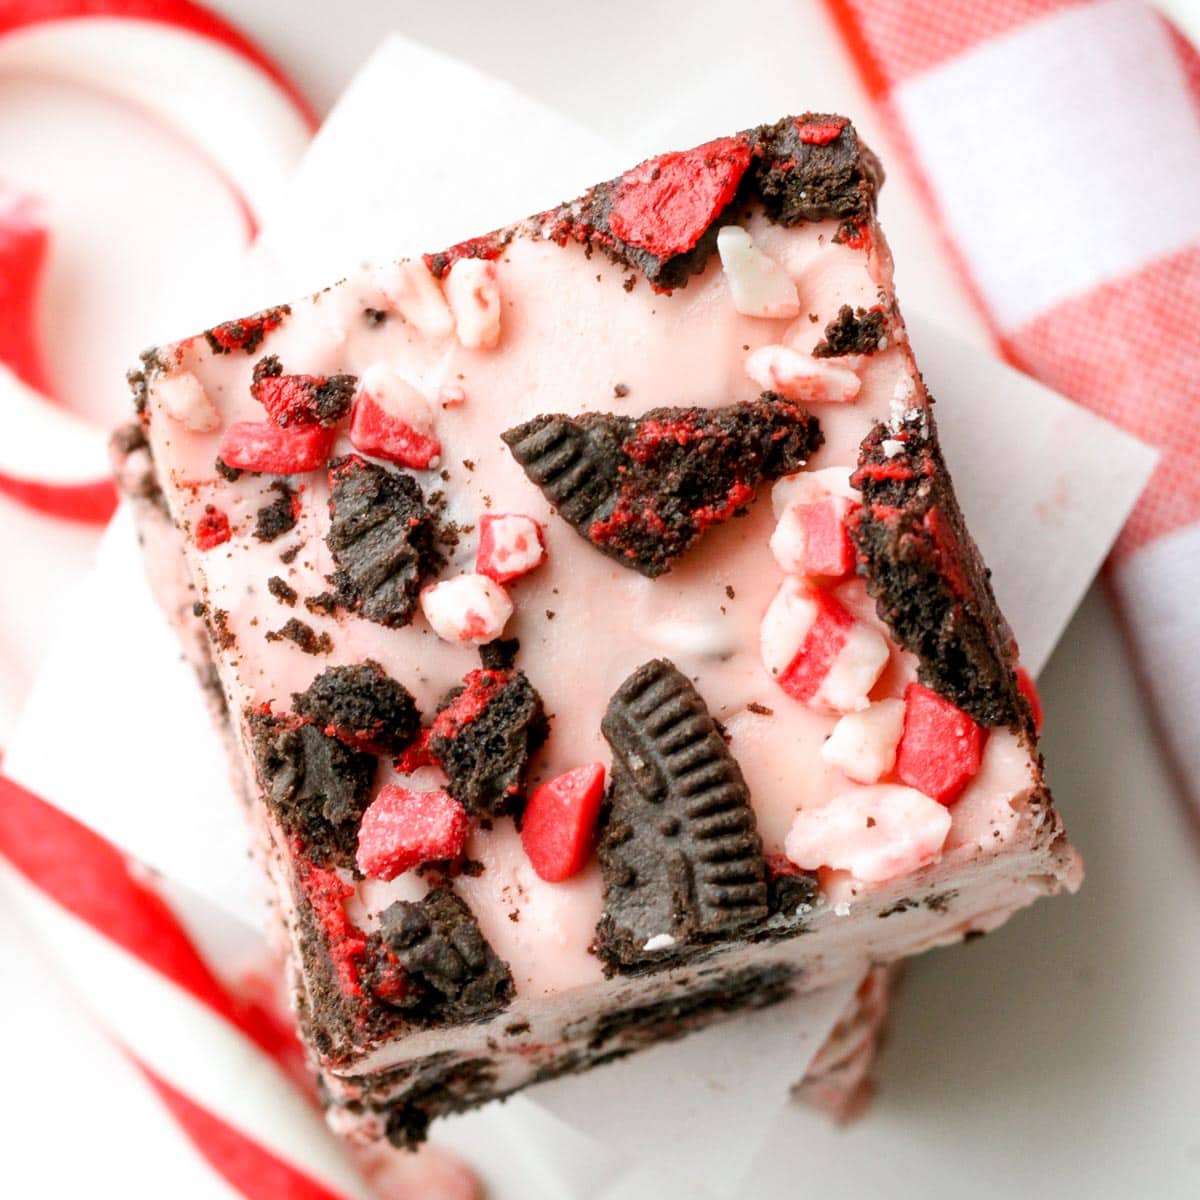 Christmas desserts - a square slice of peppermint oreo fudge on a plate.